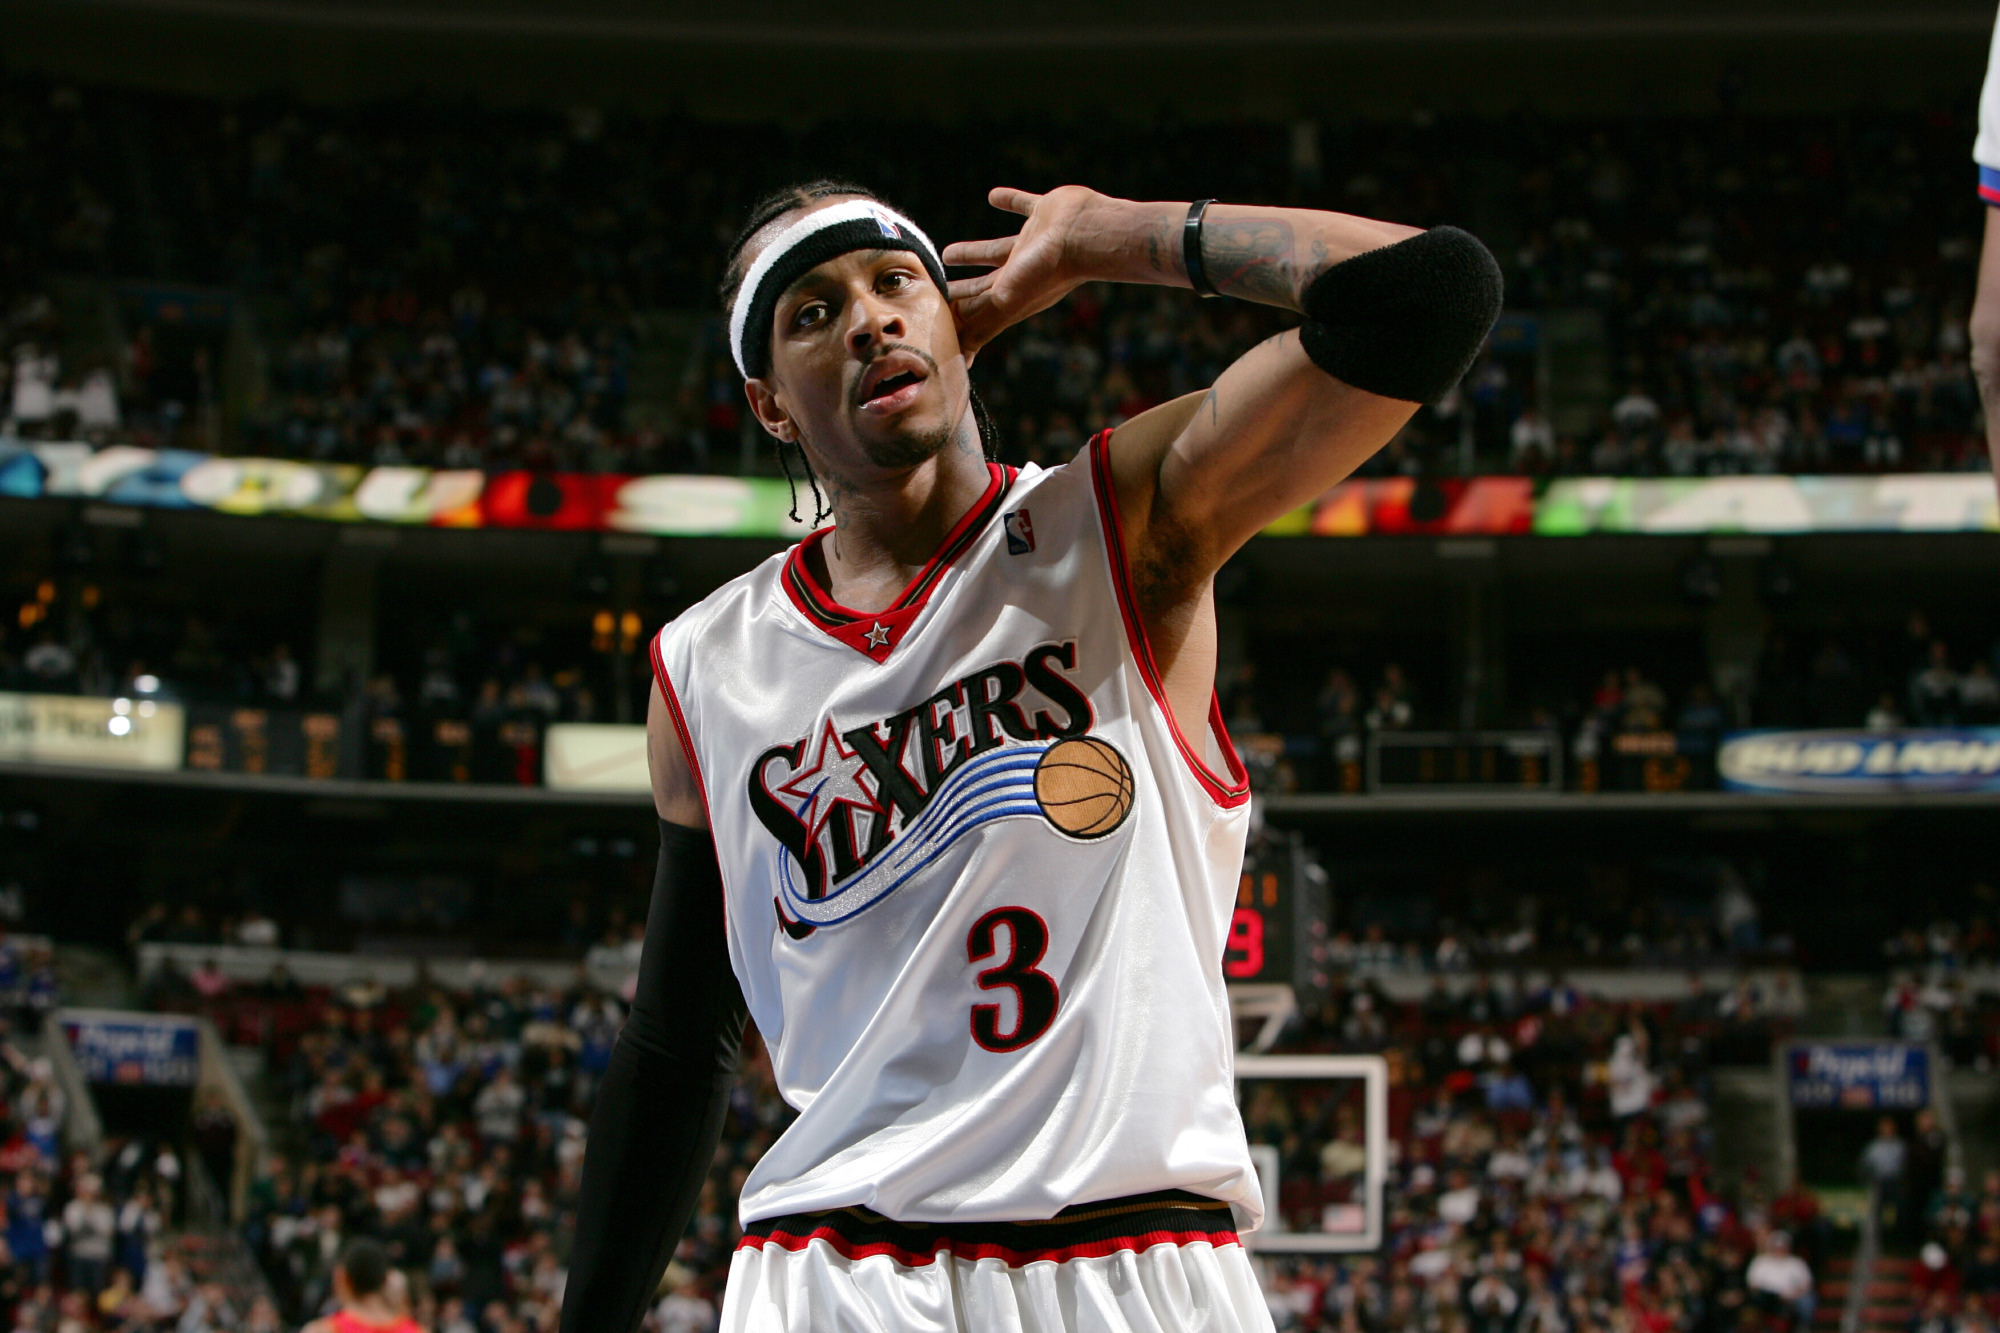 PHILADELPHIA - FEBRUARY 4: Allen Iverson #3 of the Philadelphia 76ers signals the crowd to get loud during the game against the Atlanta Hawks on February 4, 2005 at the Wachovia Center in Philadelphia, Pennsylvania. NOTE TO USER: User expressly acknowledges and agrees that, by downloading and/or using this Photograph, user is consenting to the terms and conditions of the Getty Images License Agreement. Mandatory Copyright Notice: Copyright 2005 NBAE (Photo by Jesse D. Garrabrant/NBAE via Getty Images)